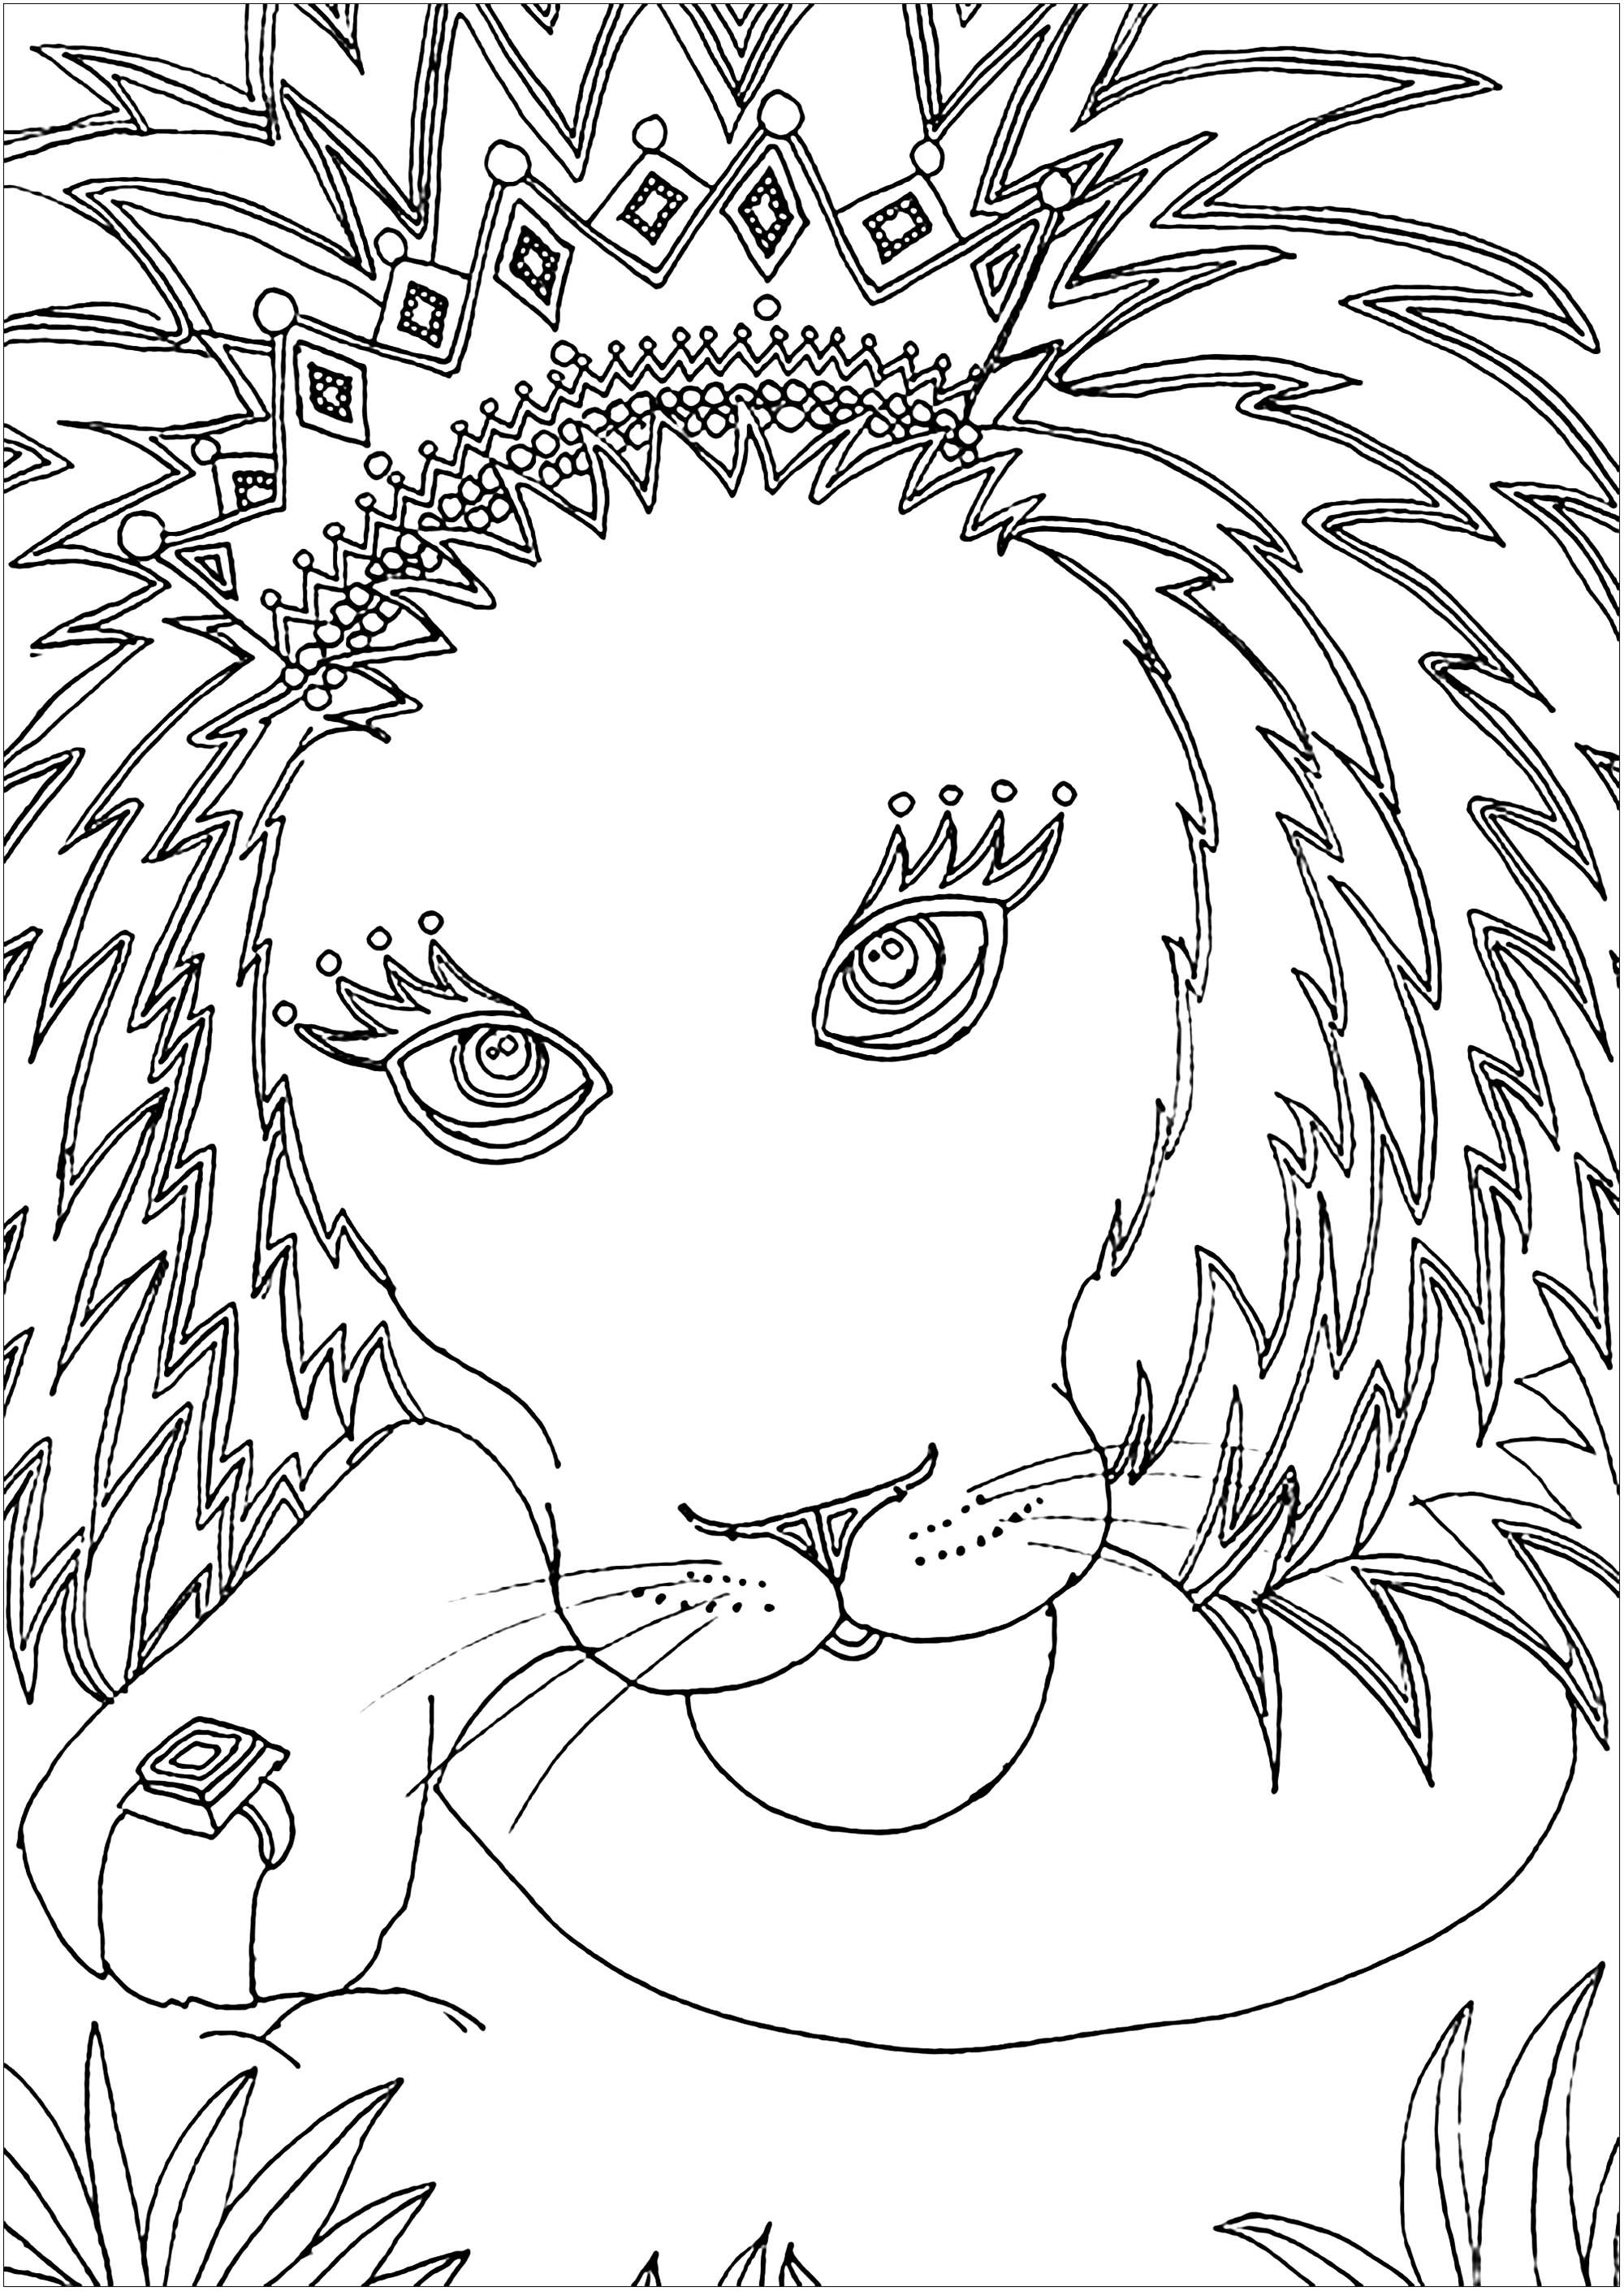 his majesty lions adult coloring pages